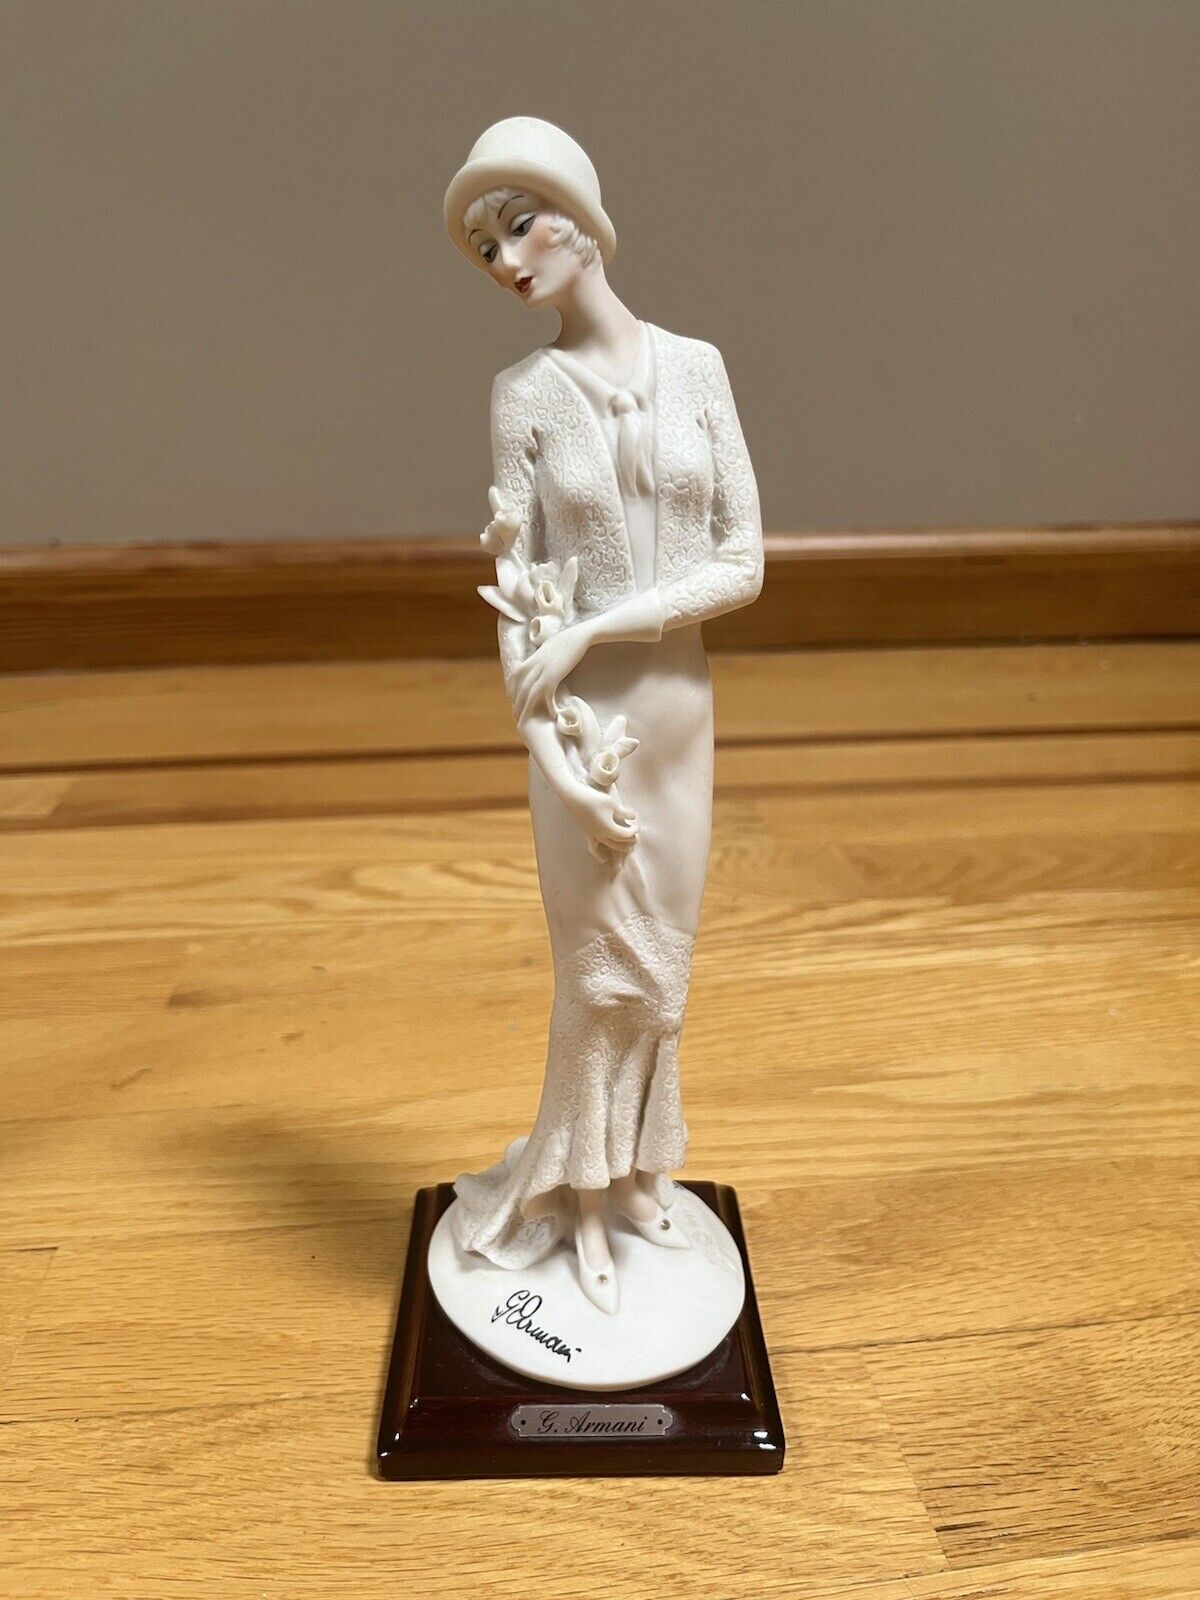 Vintage Guissepe Armani Lady with Flowers Art Deco Style Figurine Made in Italy 